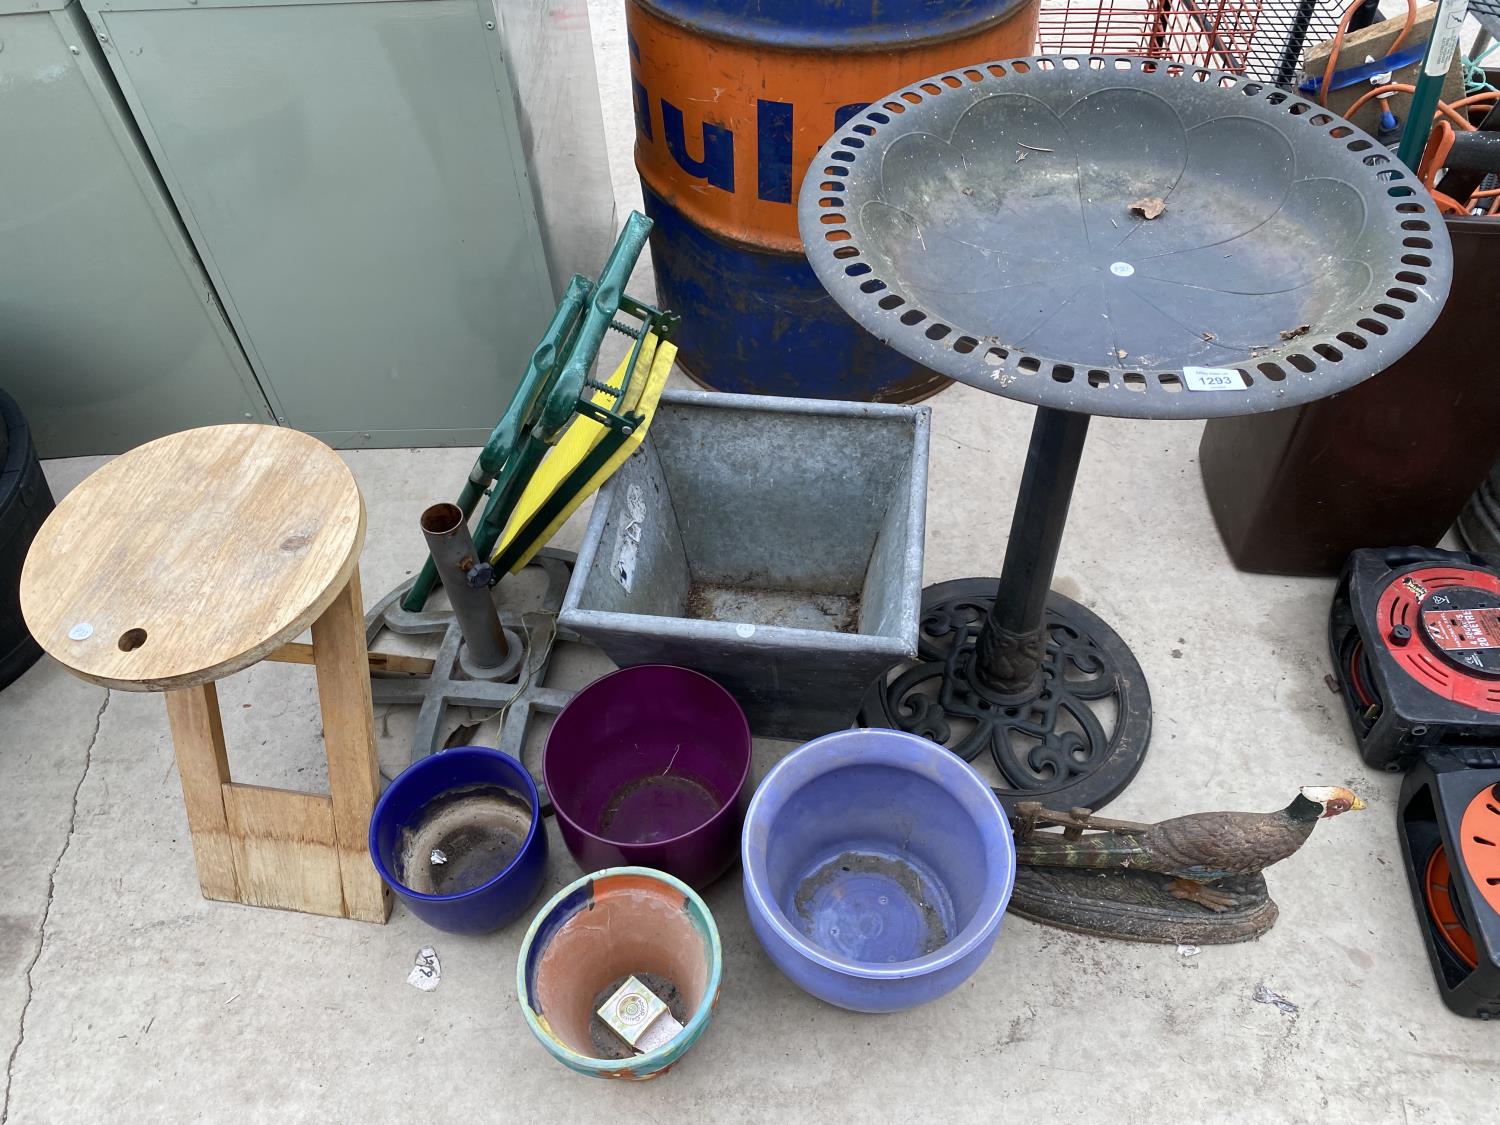 AN ASSORTMENT OF GARDEN ITEMS TO INCLUDE A PARASOL BASE, A PLASTIC BIRD BATH AND VARIOUS PLANT